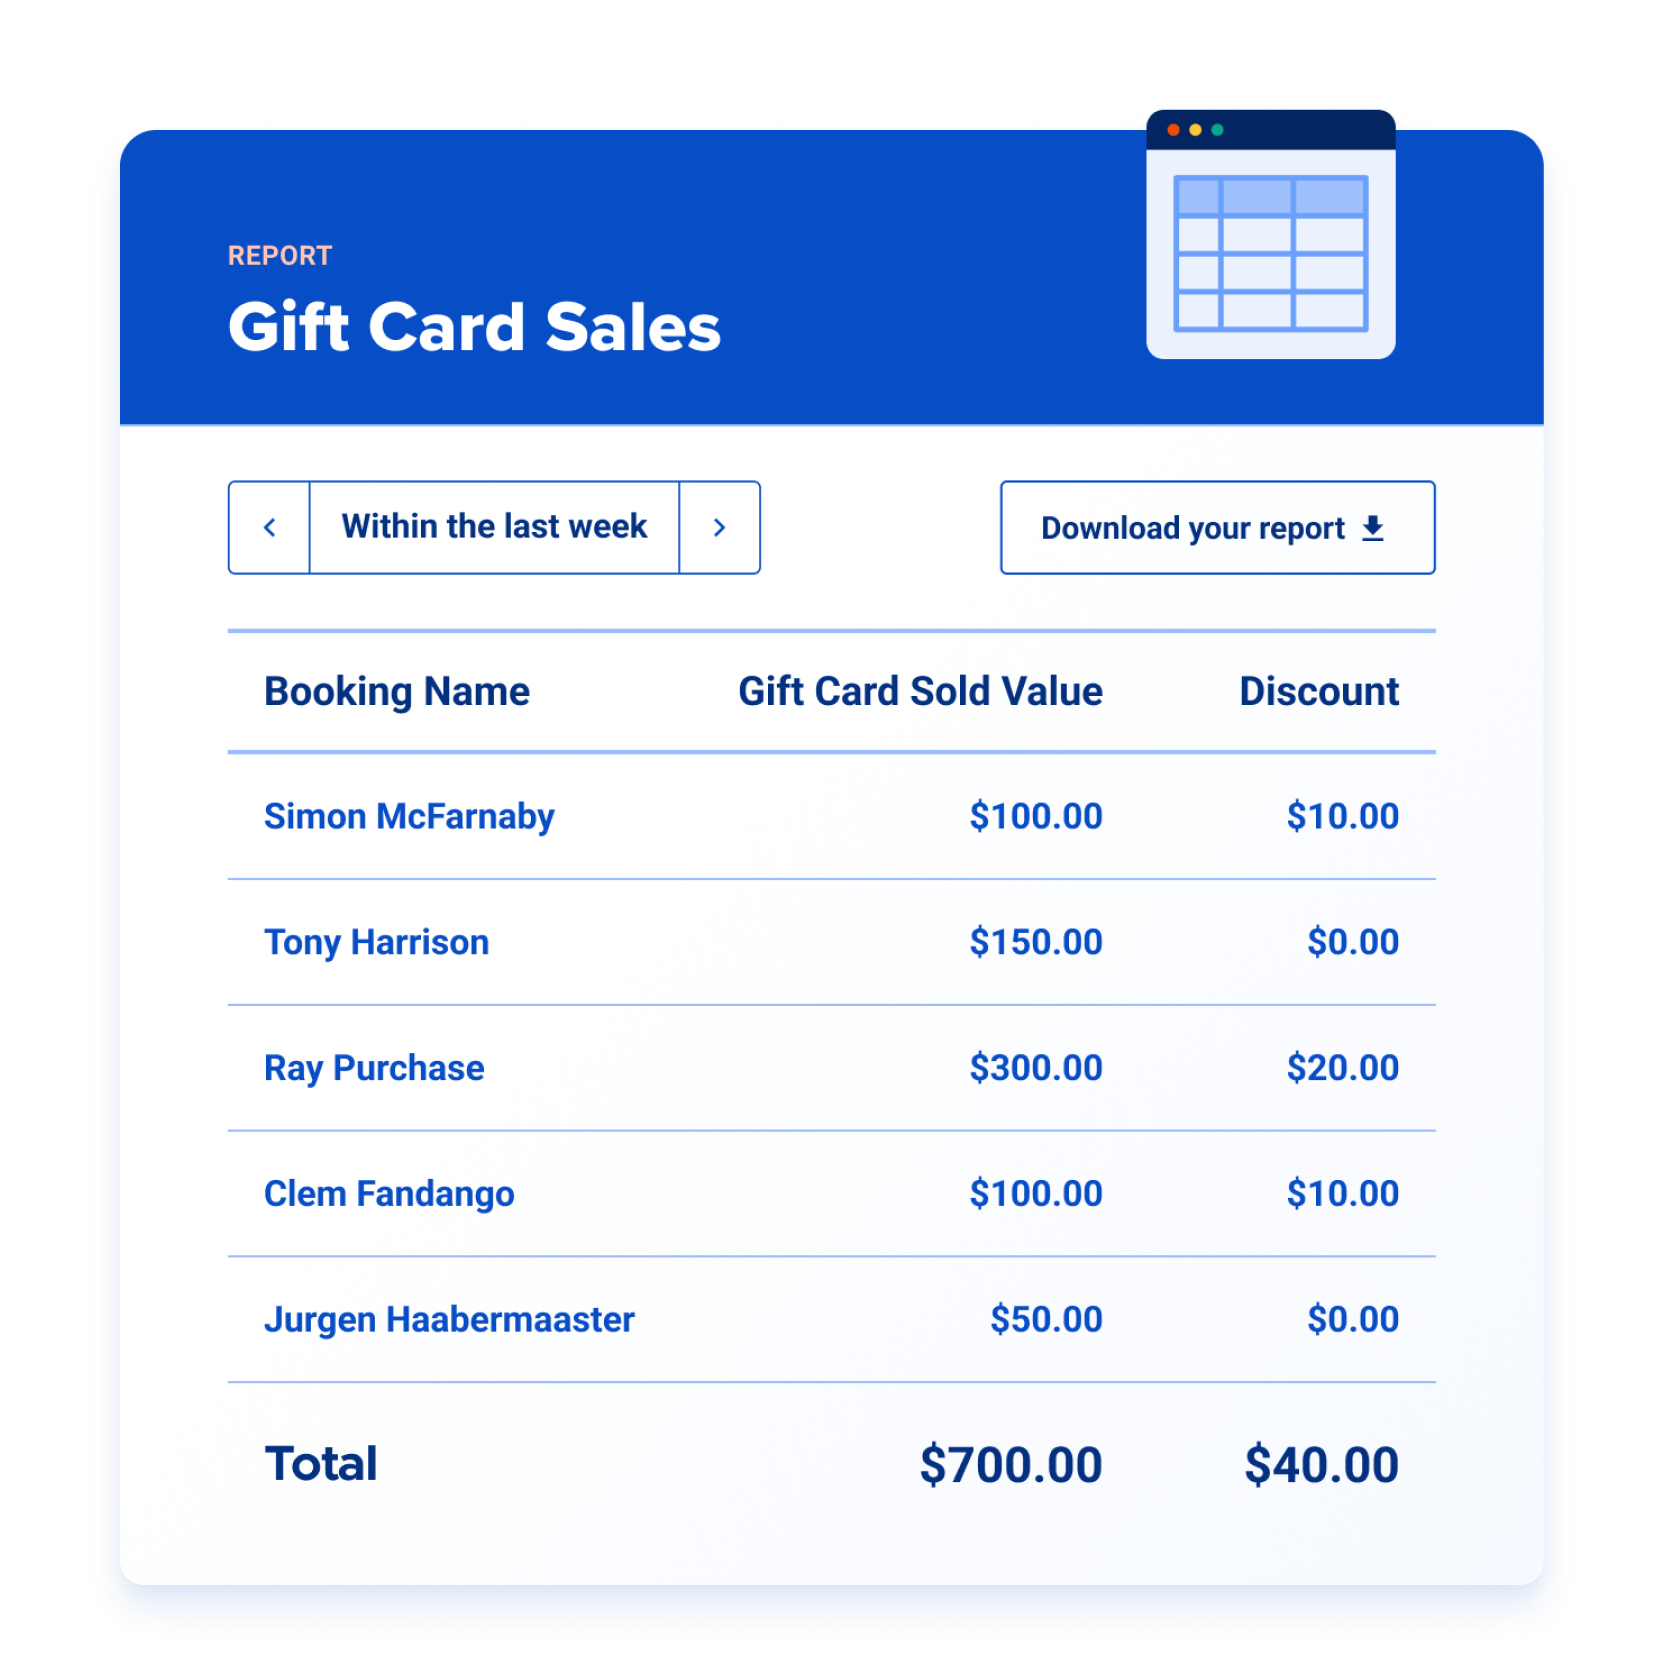 Gift card sales report